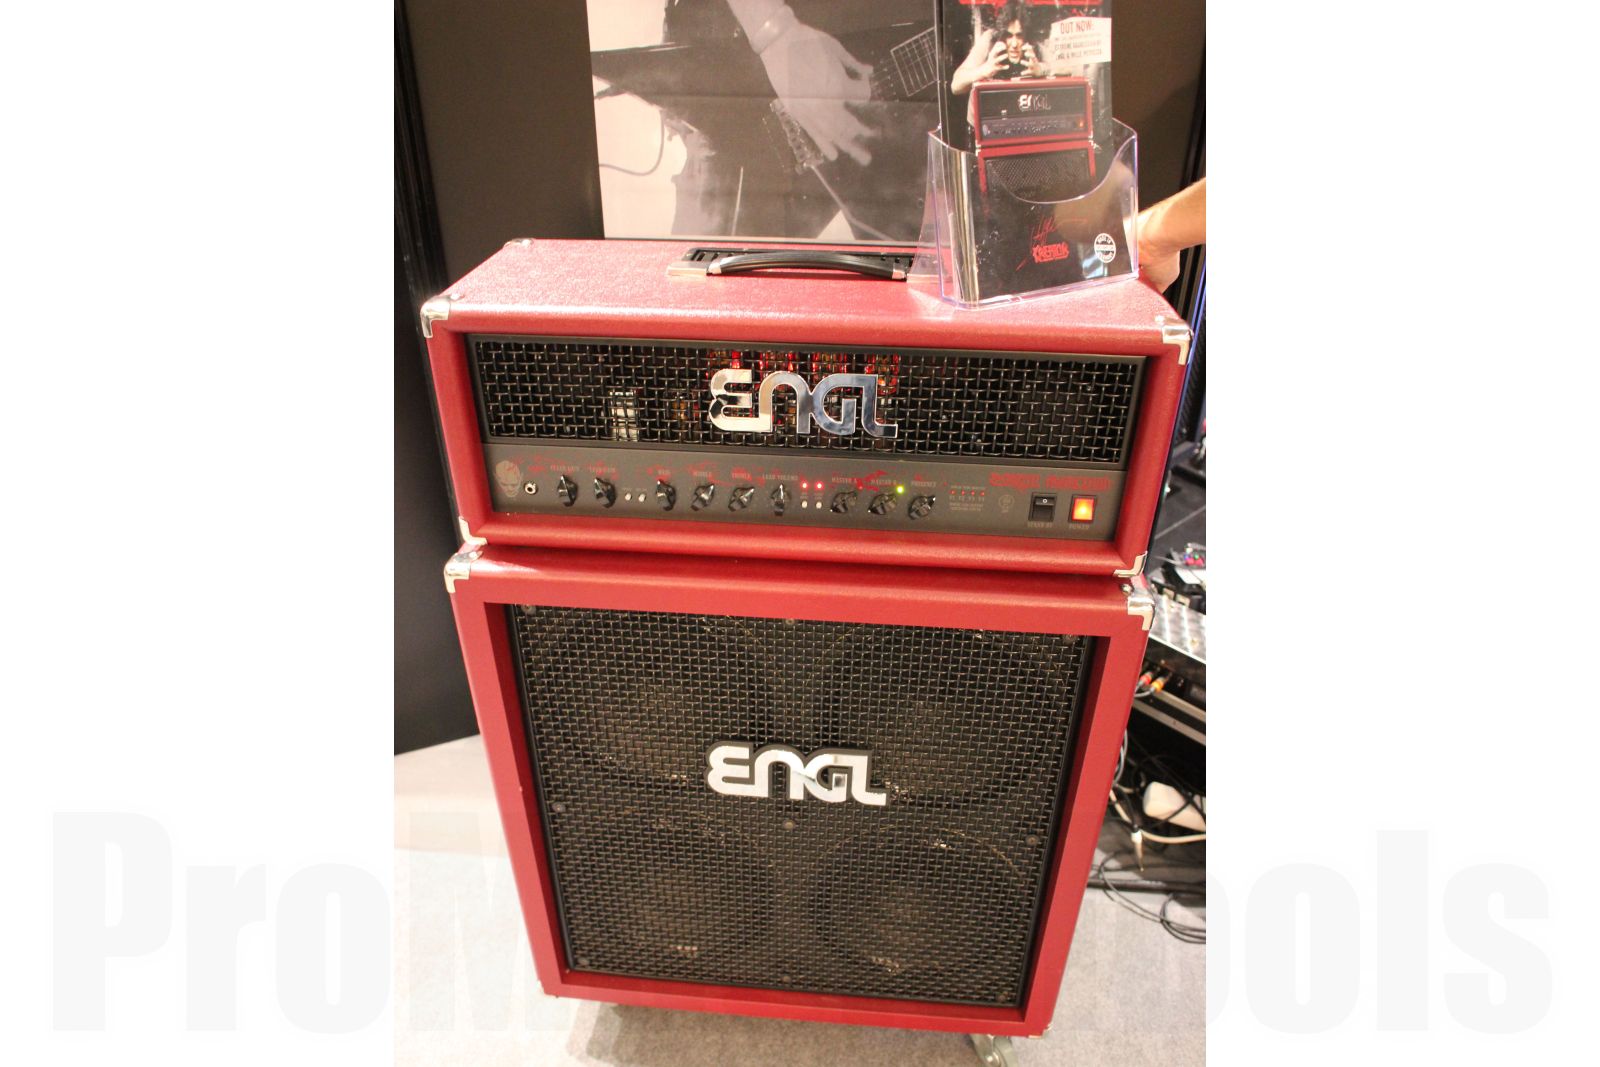 The Extreme Aggression amp head is sold separately and not included in this offer.